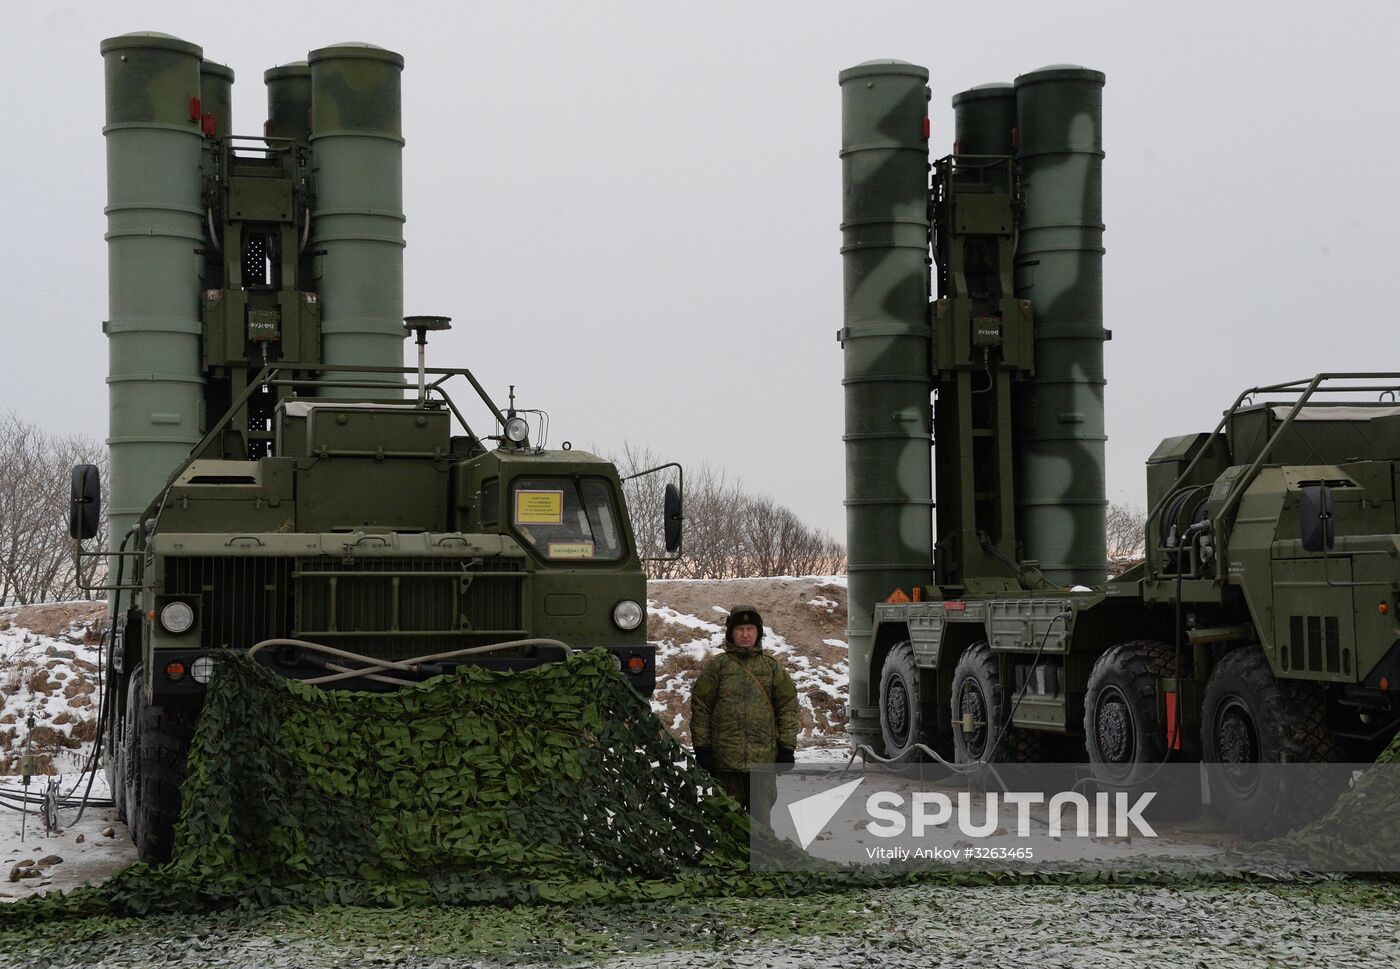 S-400 Air Defense Missile System battalion takes up beauty near Vladivostok